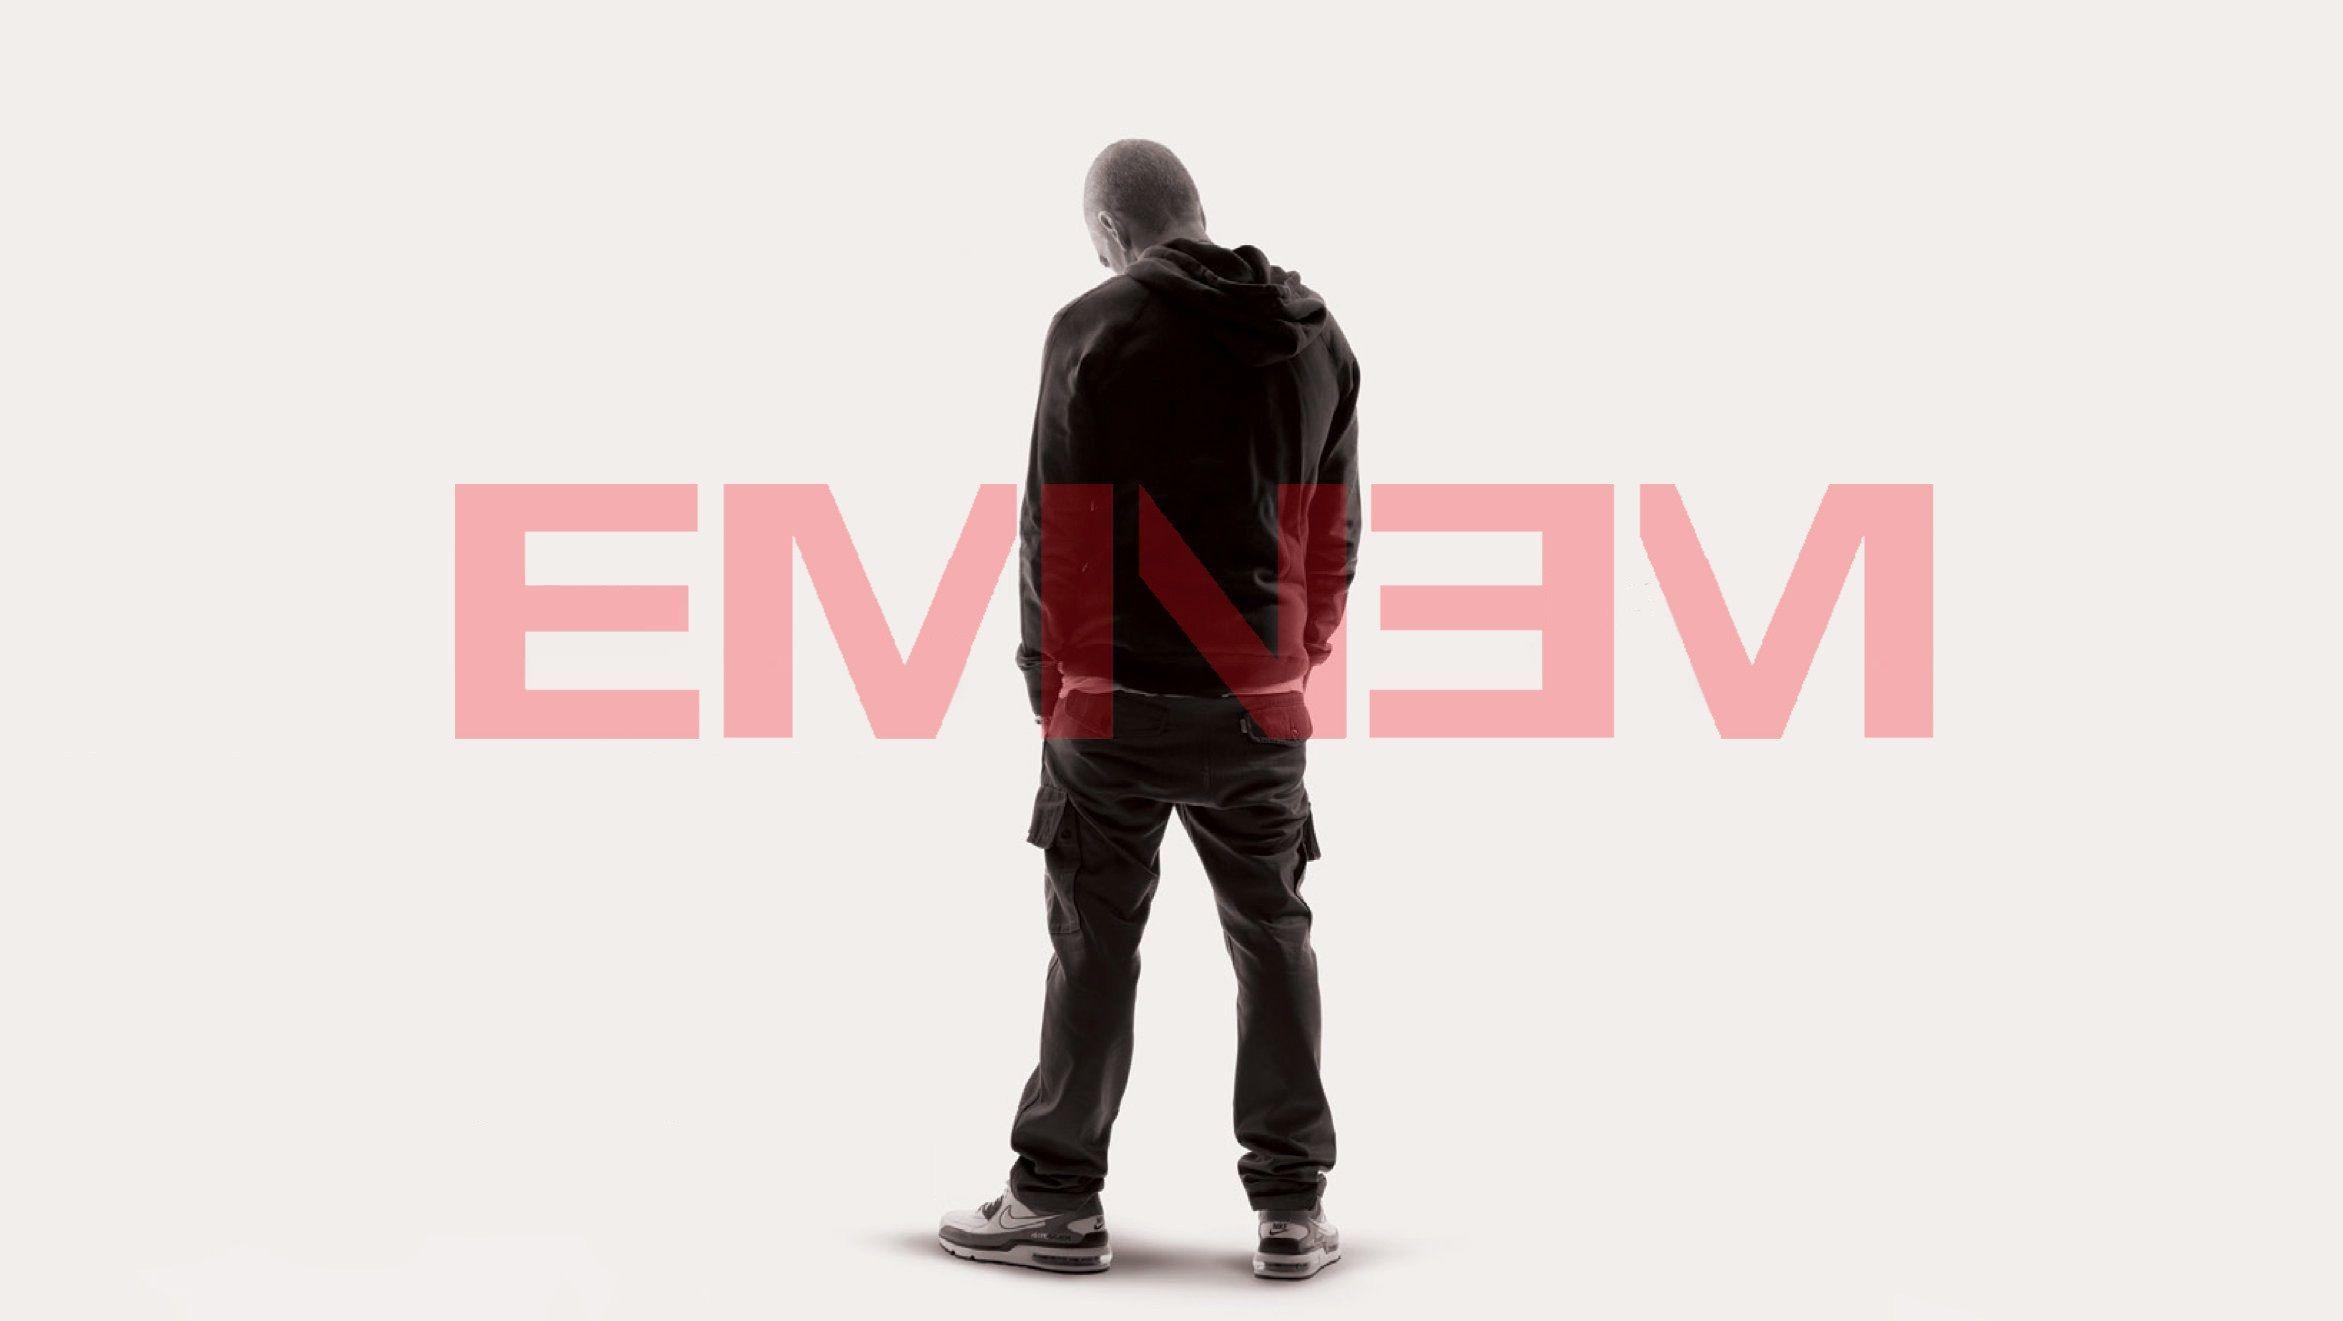 Eminem Wallpaper I made, thought you guys might enjoy it